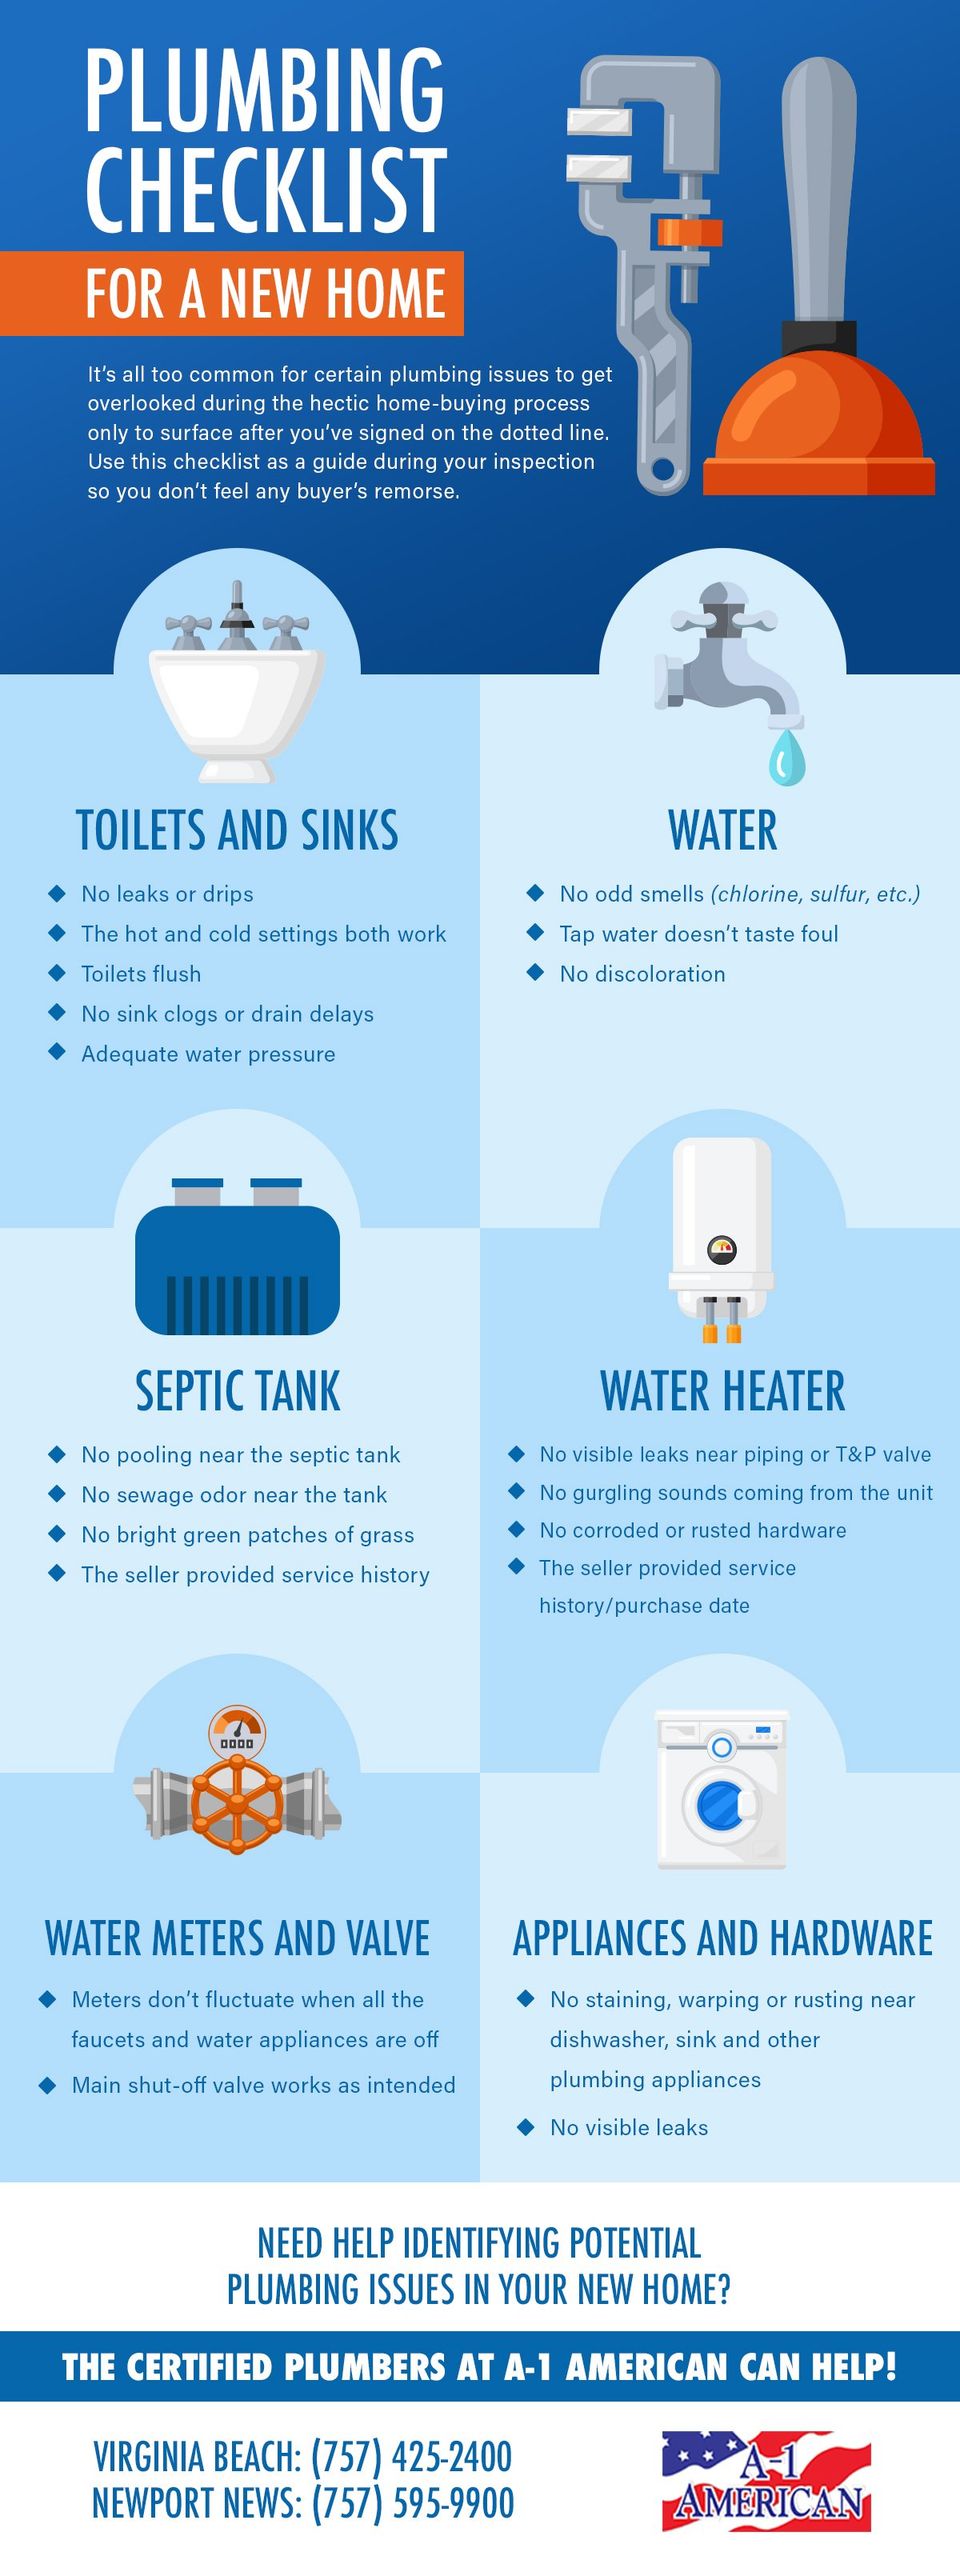 Check off things to do for your sinks, tubs, water heater, dishwasher and indoor and outdoor pipes. A-1 American Plumbing can help. 